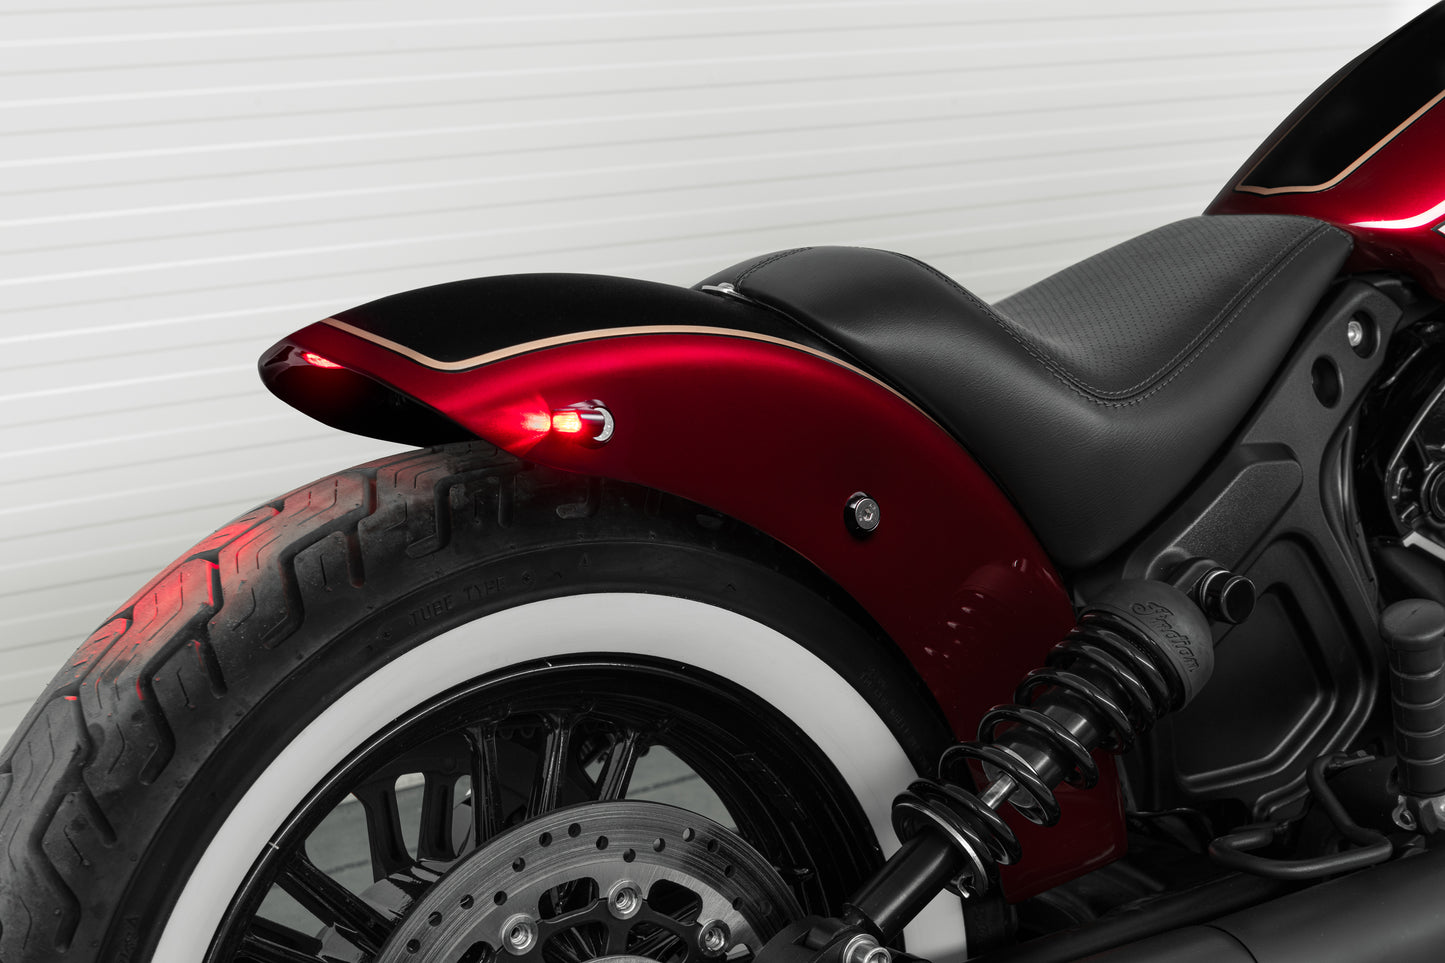 Harley Davidson motorcycle with Killer Custom "Tomahawk" rear fender from the side white background